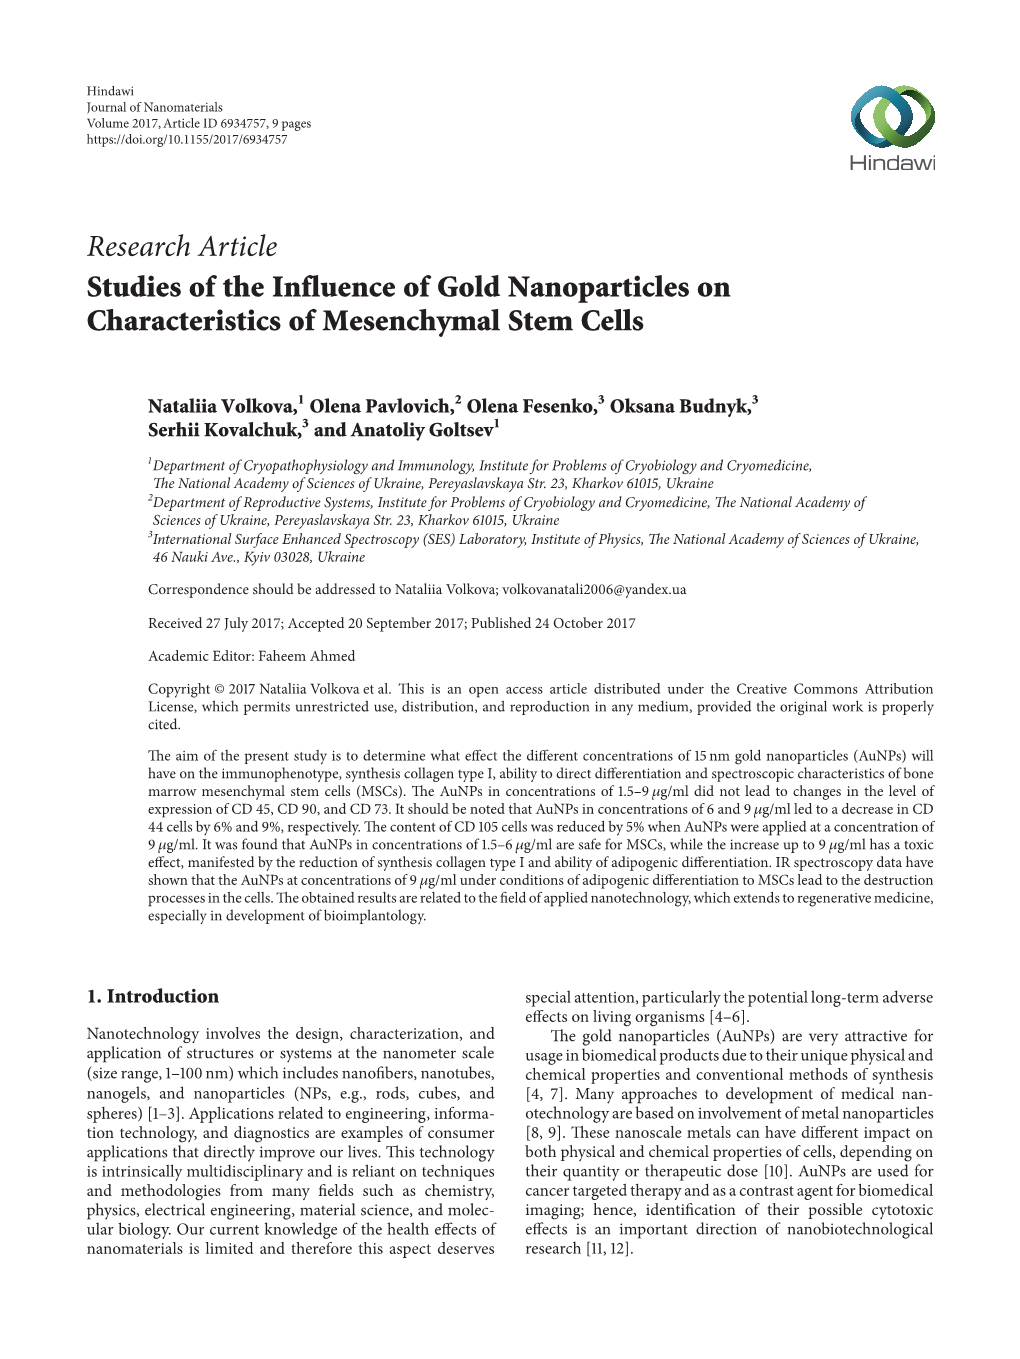 Research Article Studies of the Influence of Gold Nanoparticles on Characteristics of Mesenchymal Stem Cells